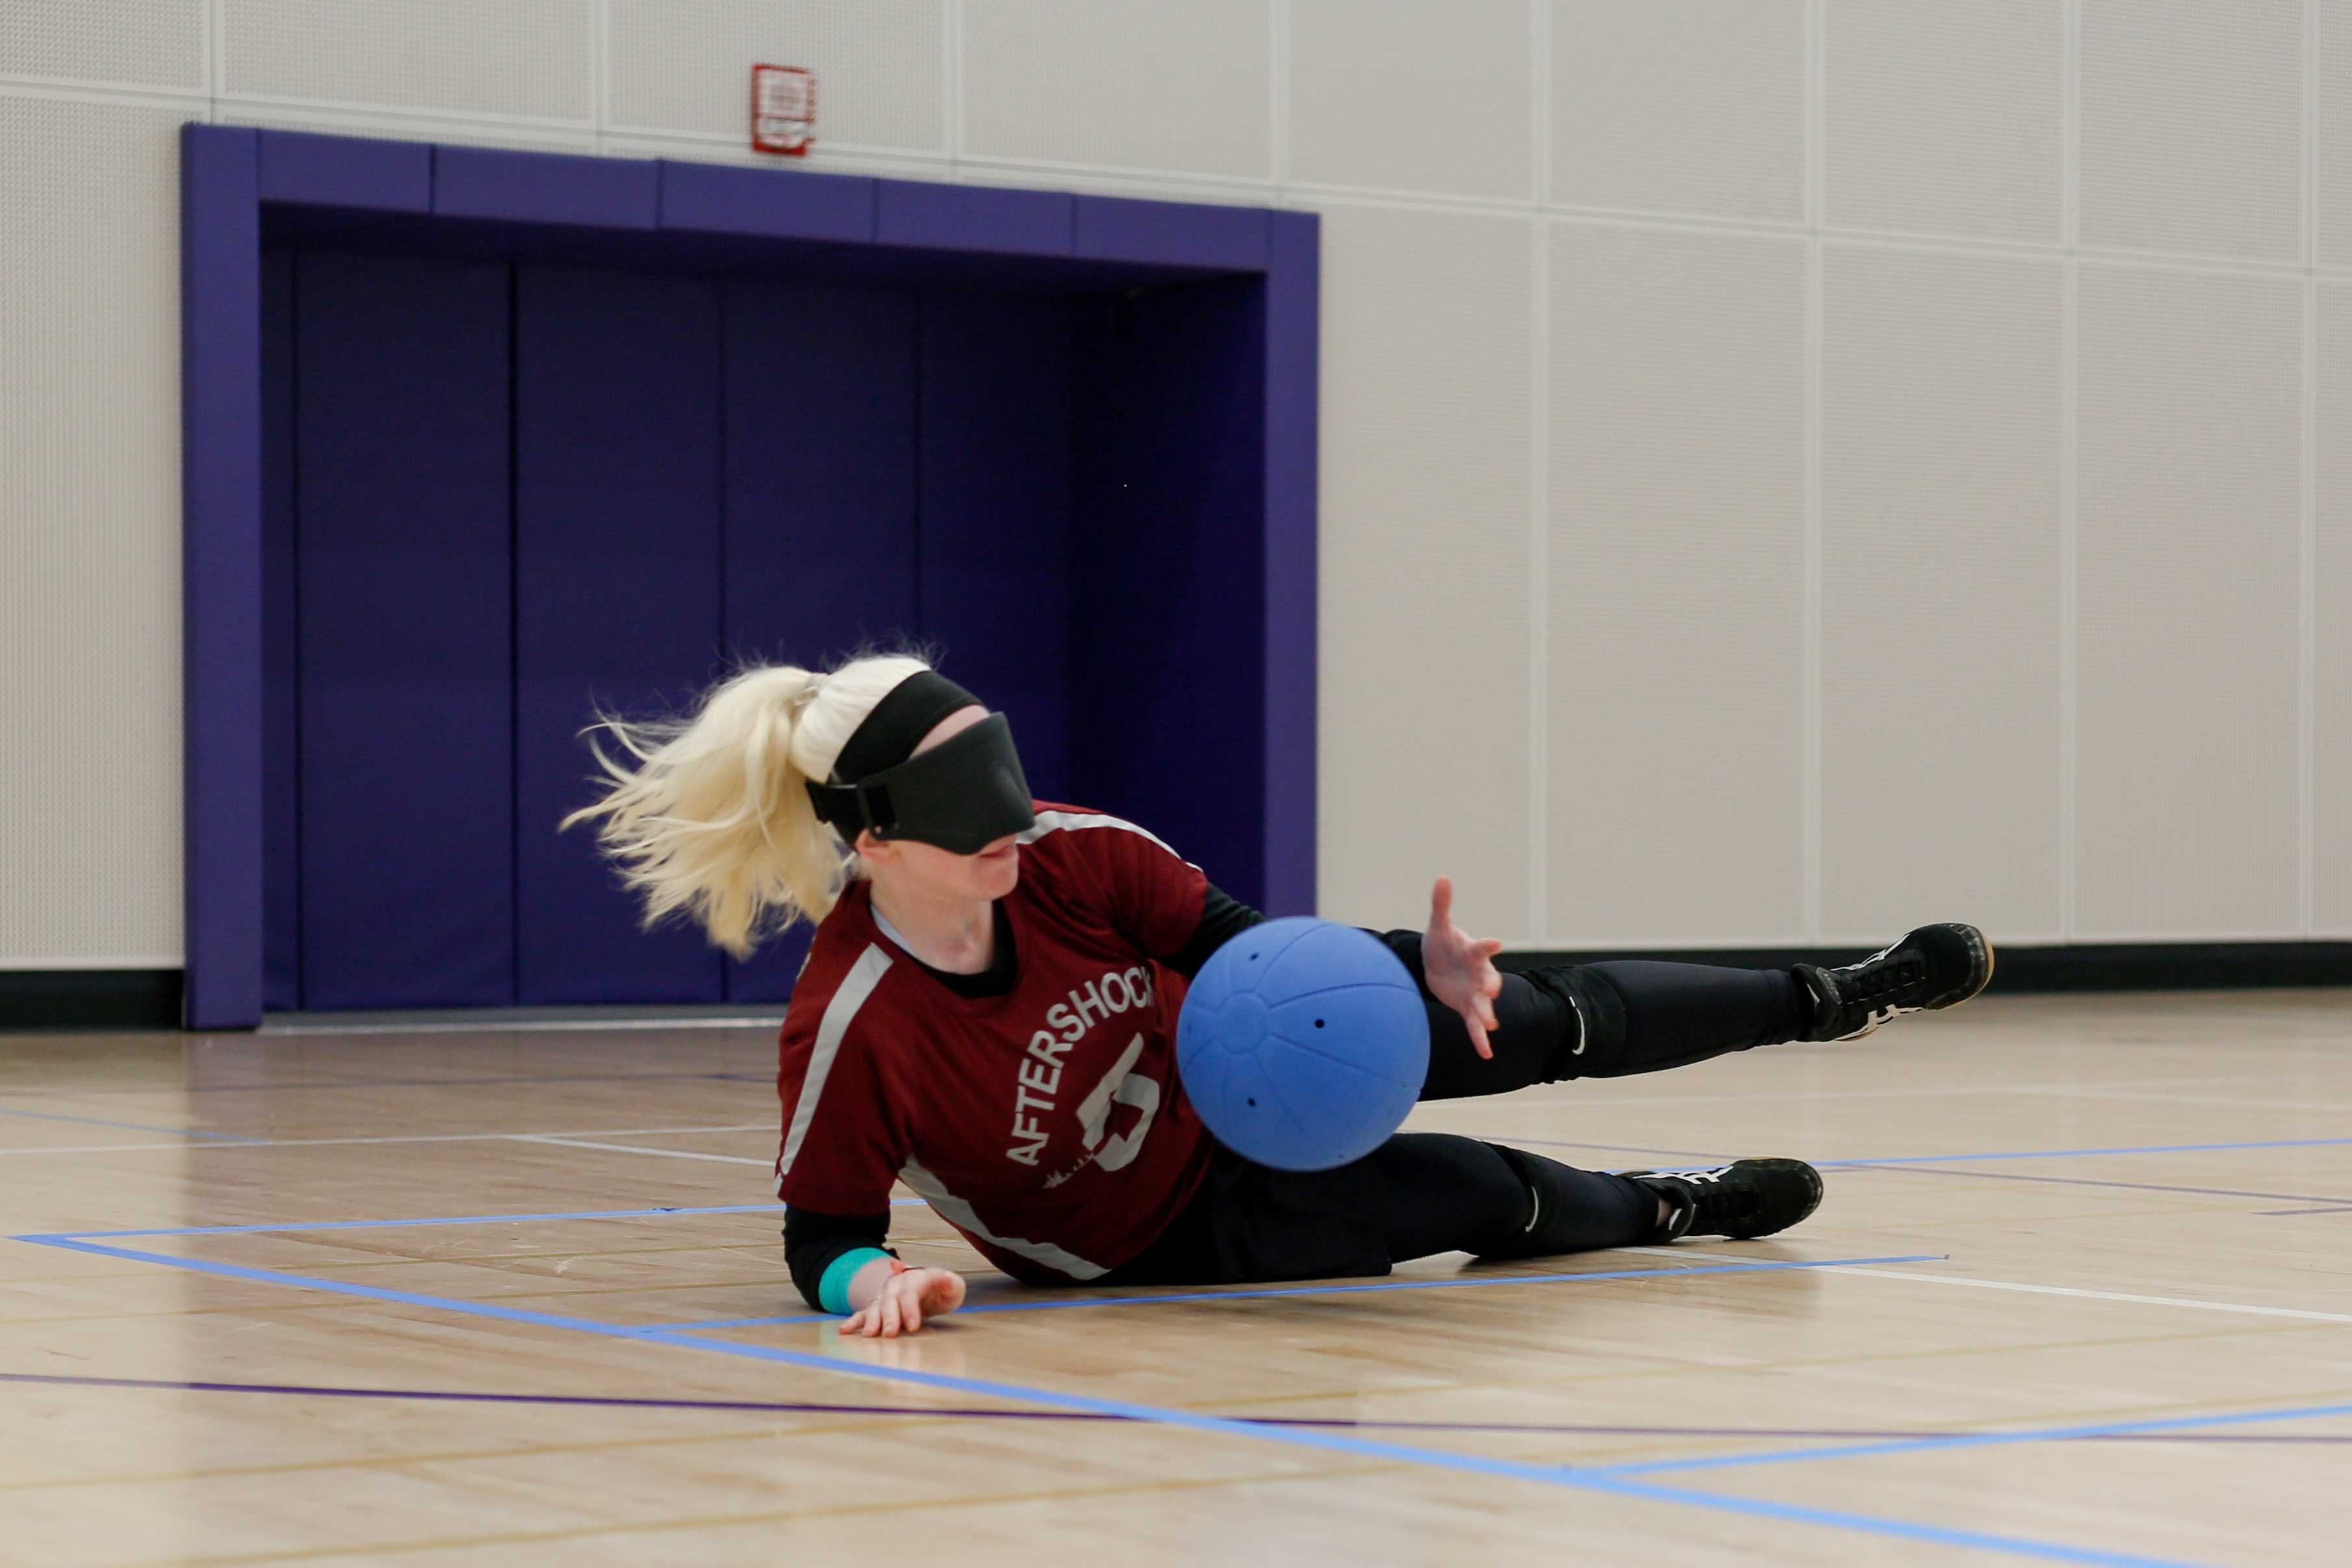 Bryanna Stubbert locates and blocks a shot during the first annual goalball exhibition at the Mashouf Wellness Center on Saturday May 5, 2018. (Niko LaBarbera/Golden Gate Xpress)